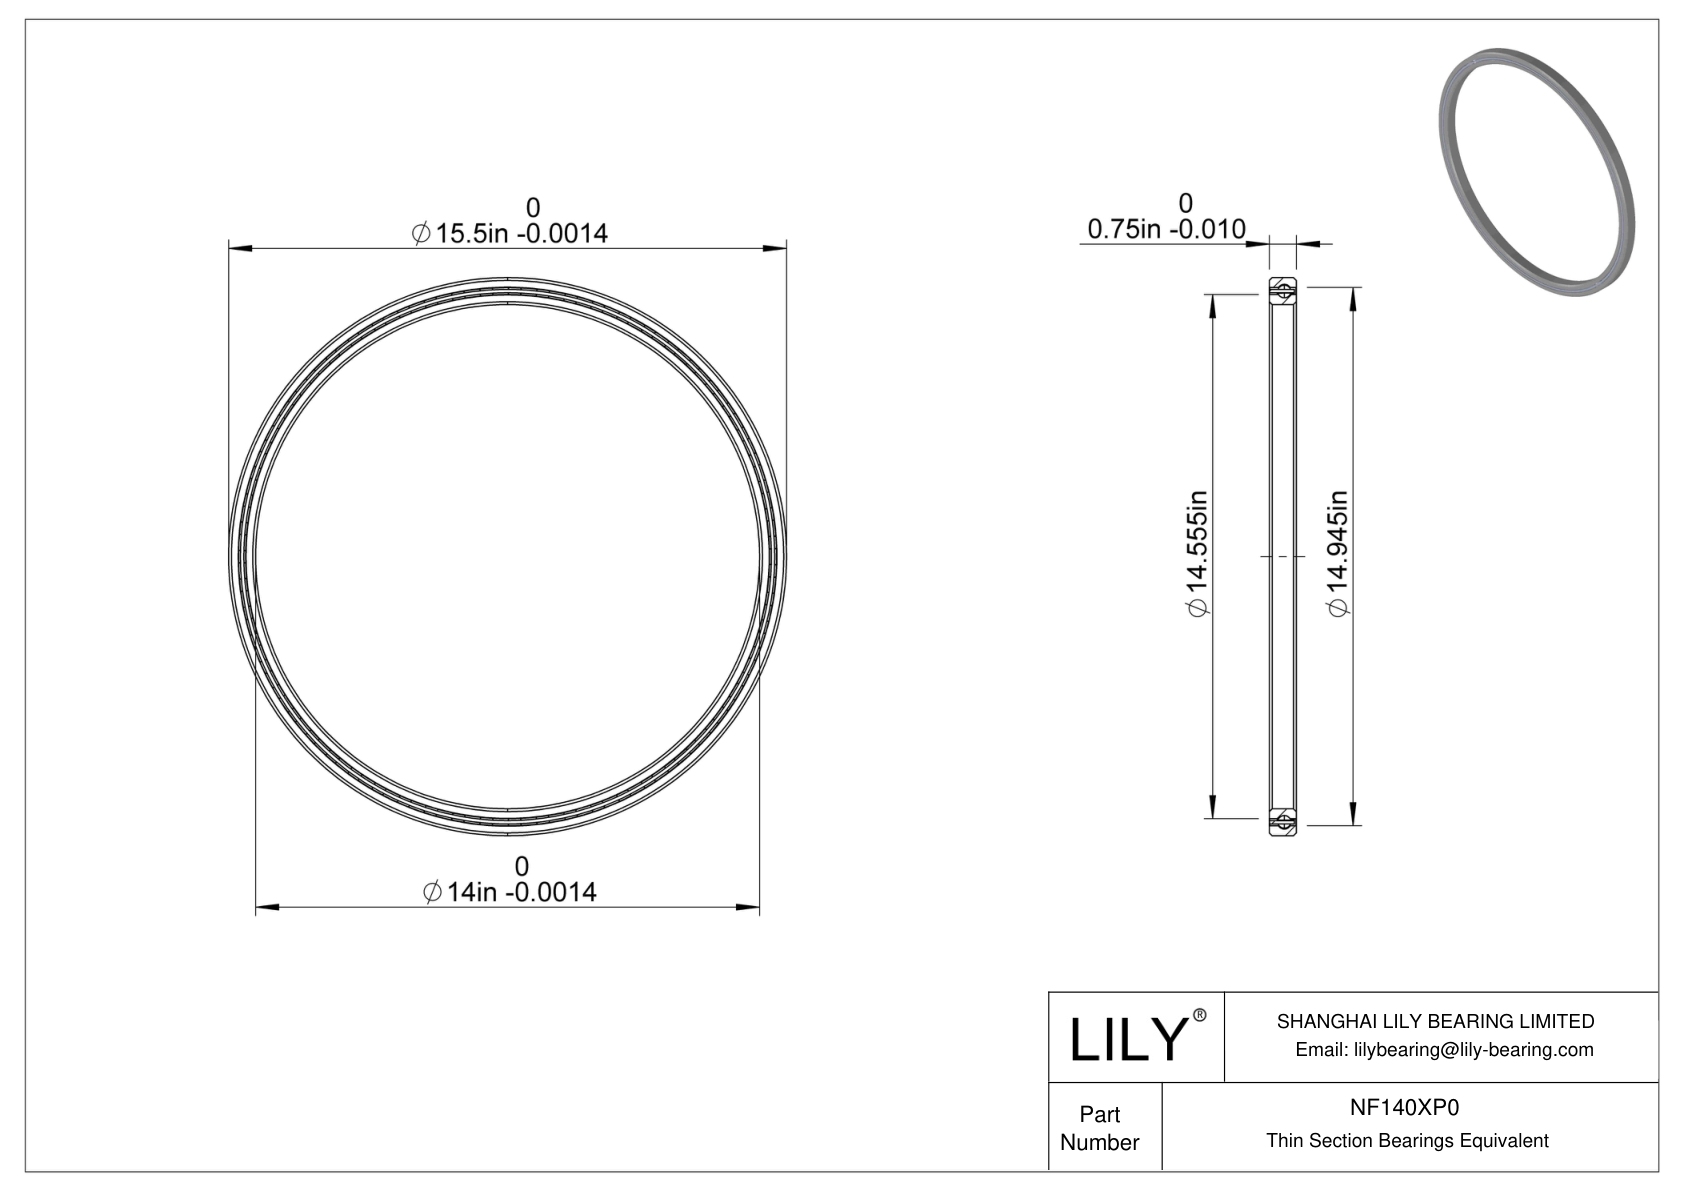 NF140XP0 Constant Section (CS) Bearings cad drawing